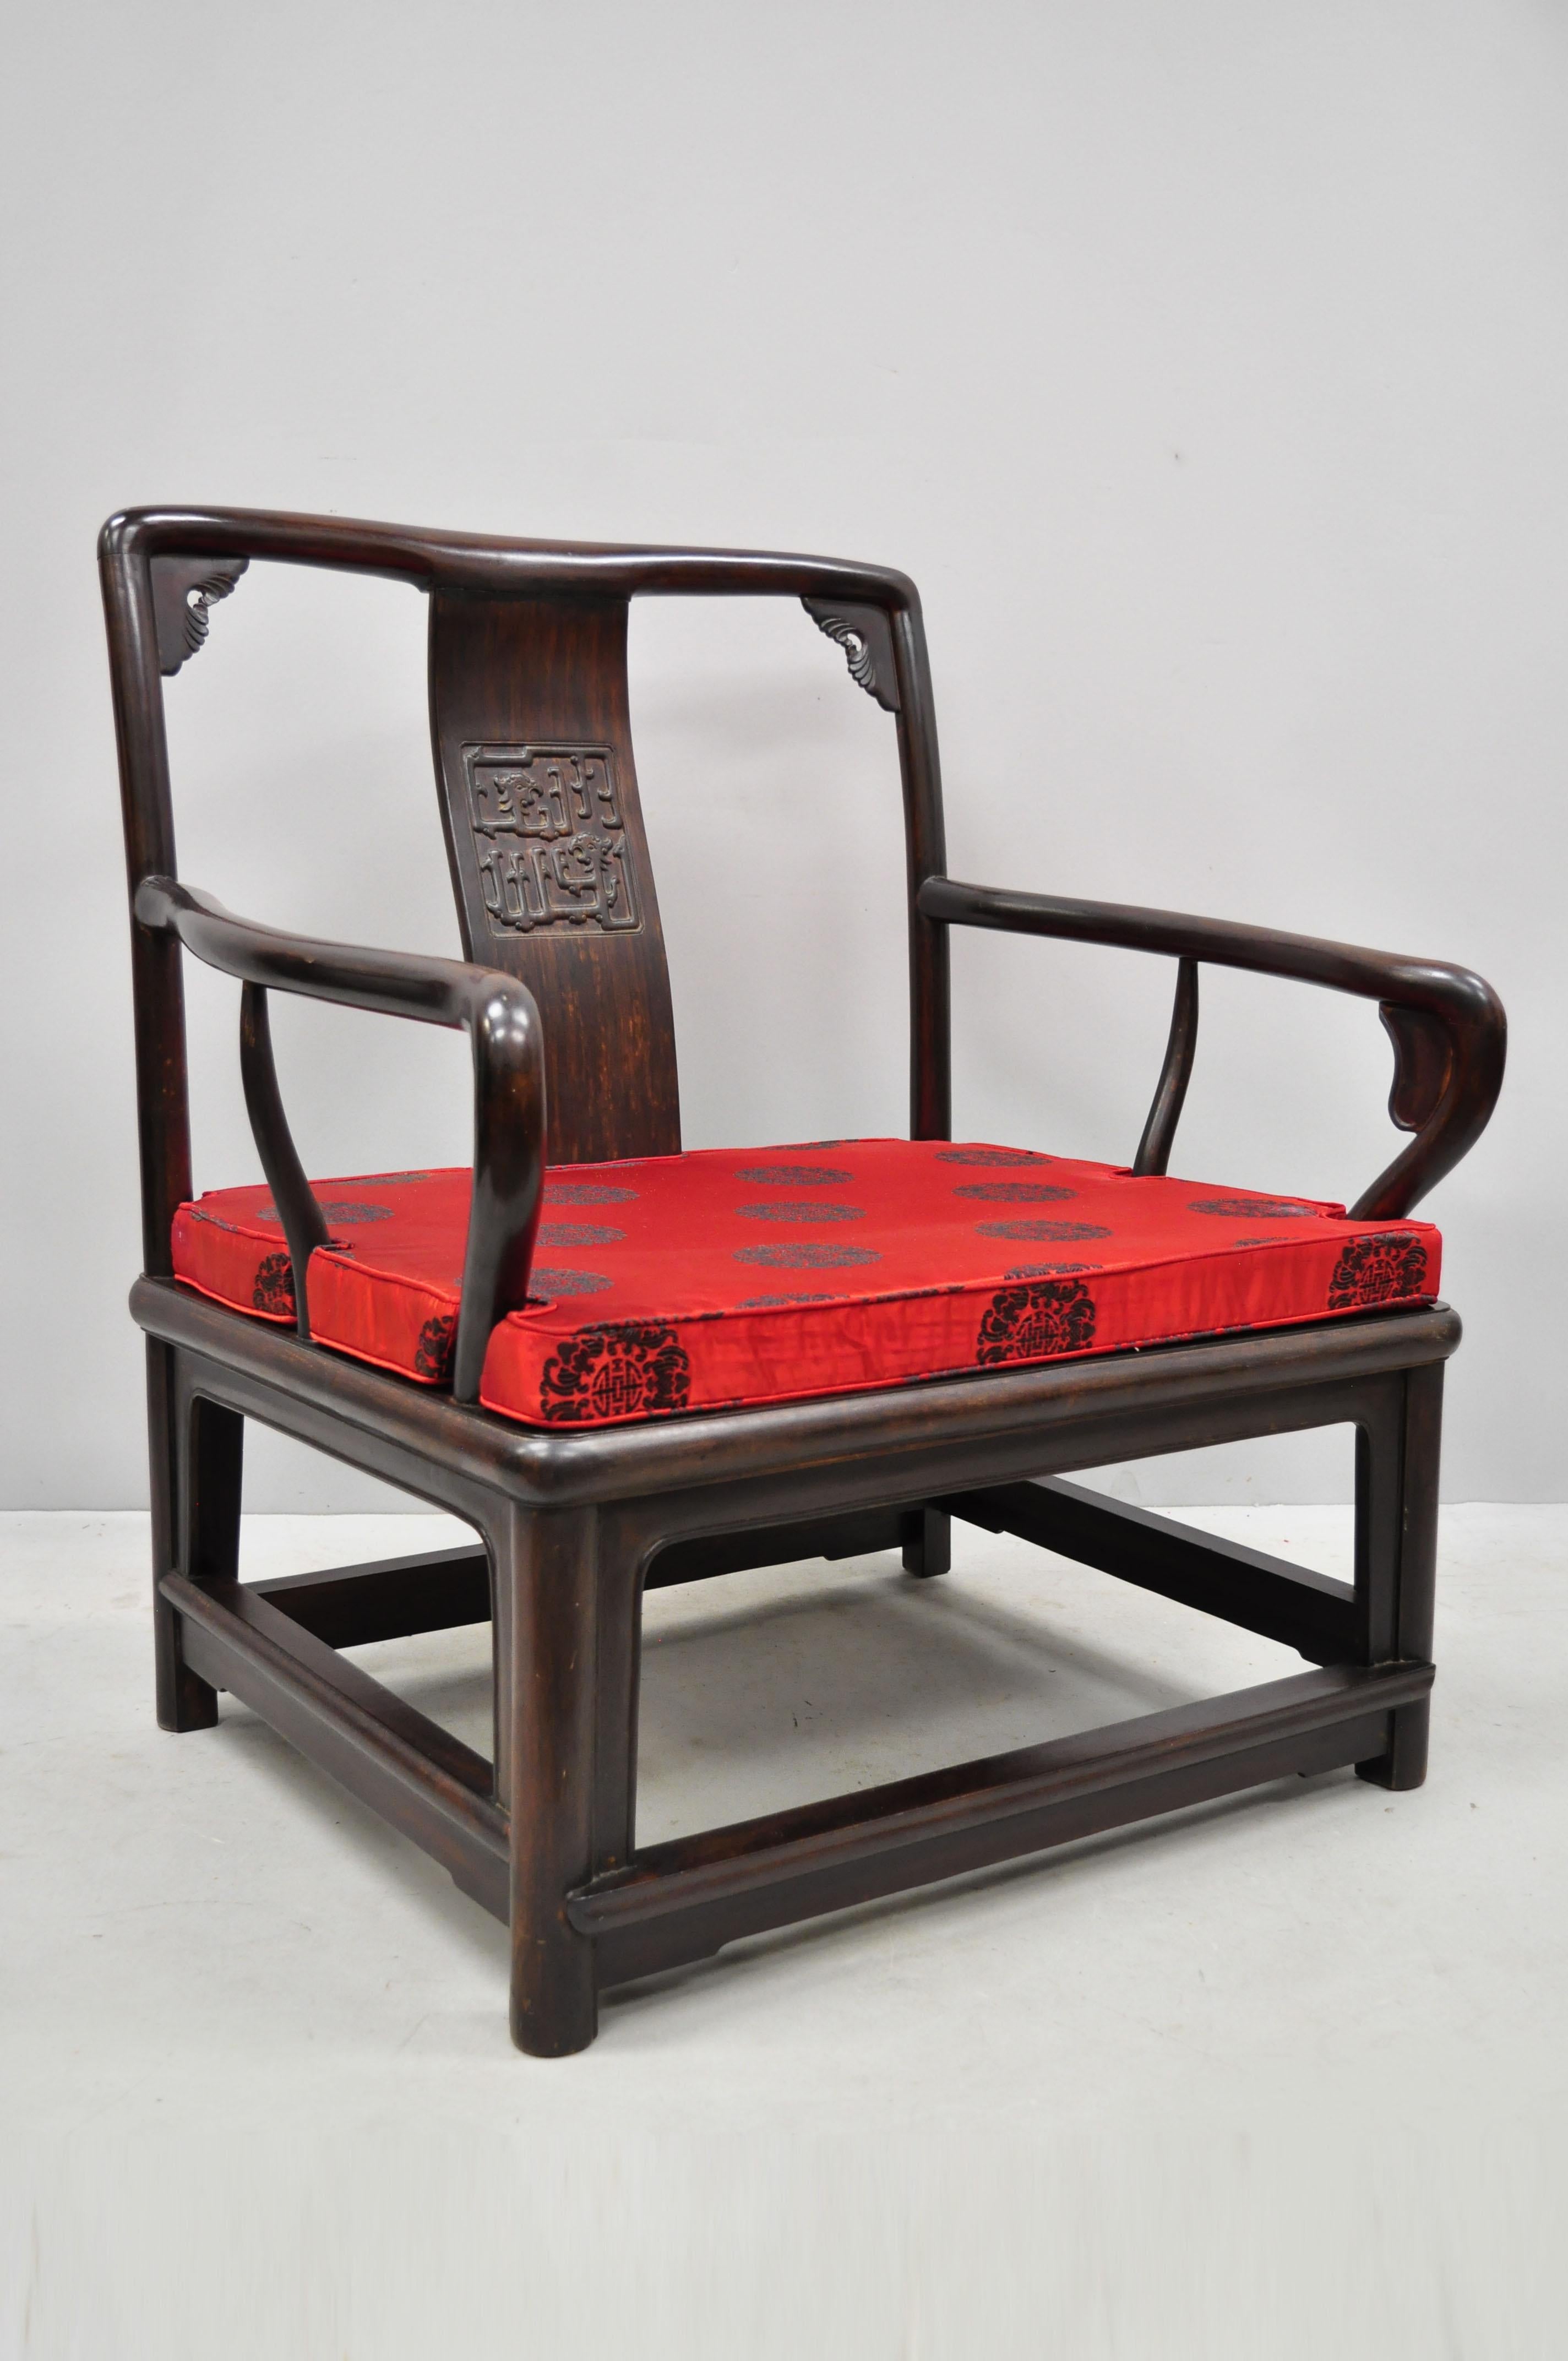 Chinese Ming style oriental carved hardwood low armchair. Item features loose cushion, solid wood construction, beautiful wood grain, nicely carved details, great style and form, circa early to mid-20th century. Measurements: 32.5